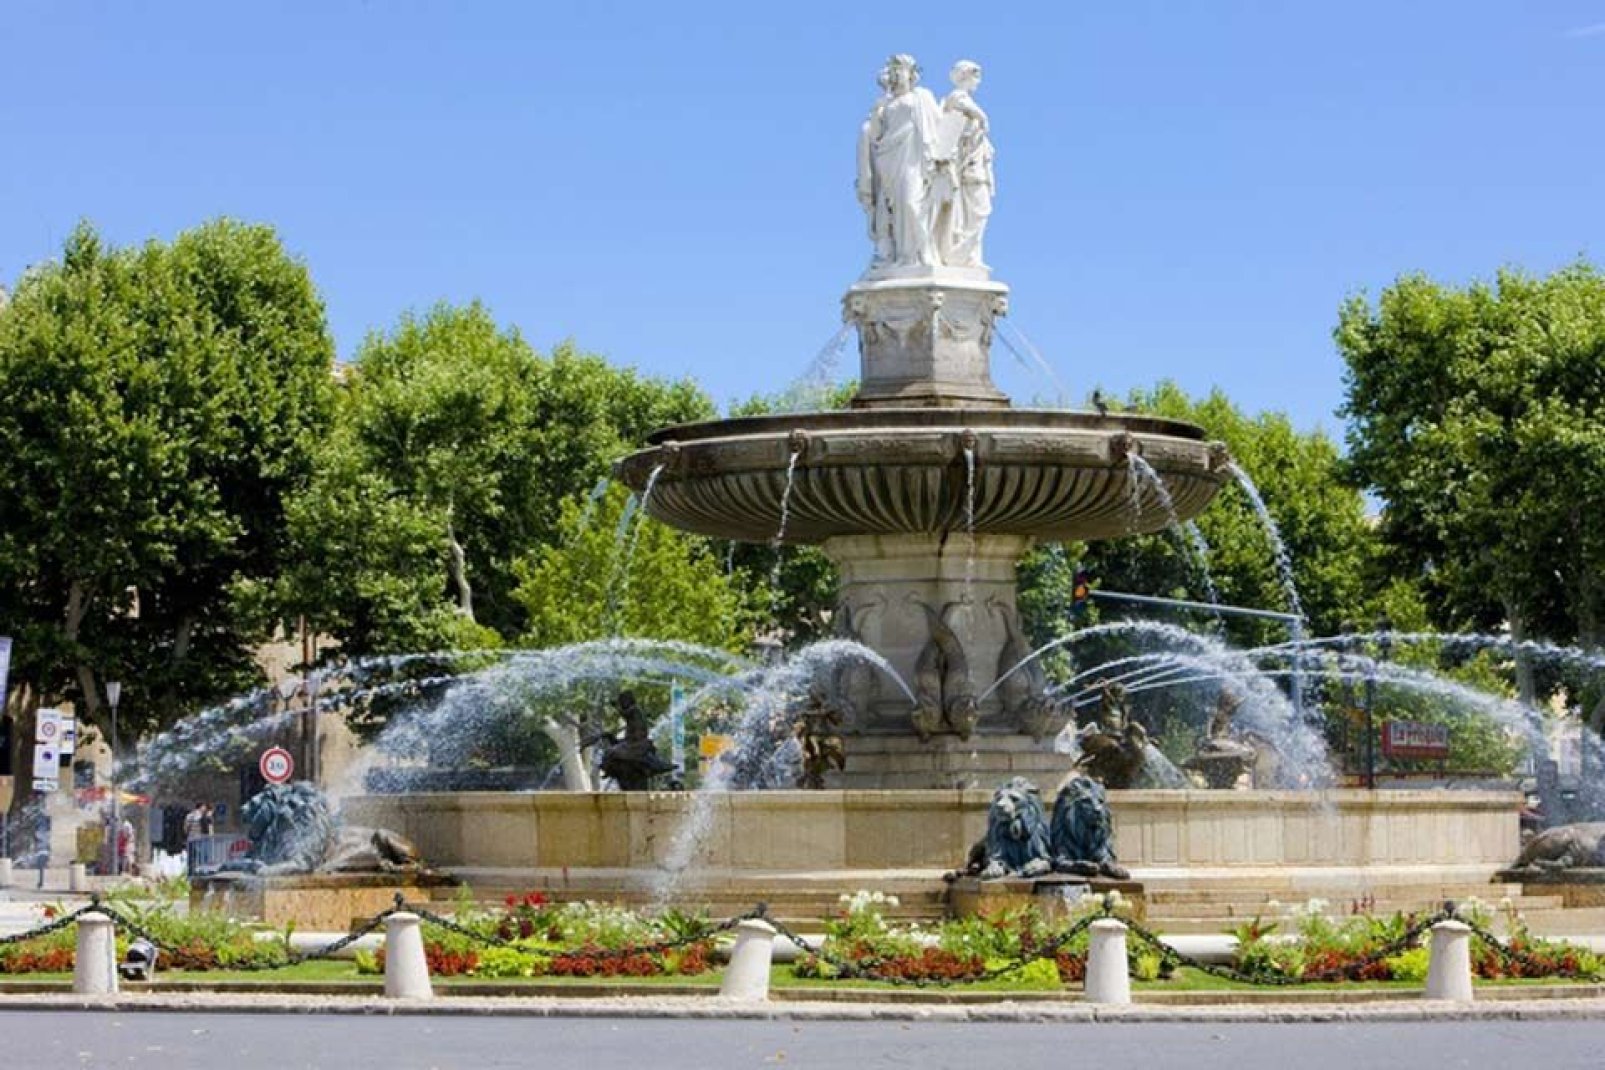 The fountain was completed in 1860 and is one of the symbolic monuments of Aix-en-Provence, thanks notably to its impressive dimensions. It is located just off the Cours Mirabeau.